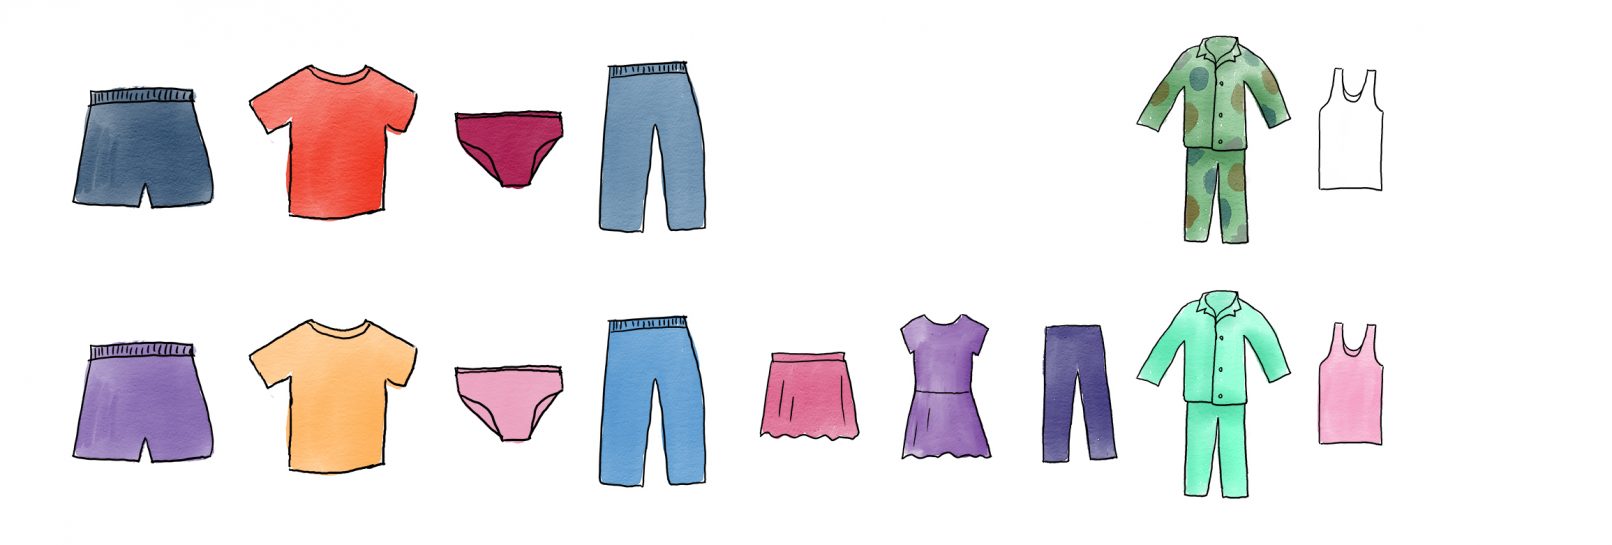 Illustrations of children's clothing items